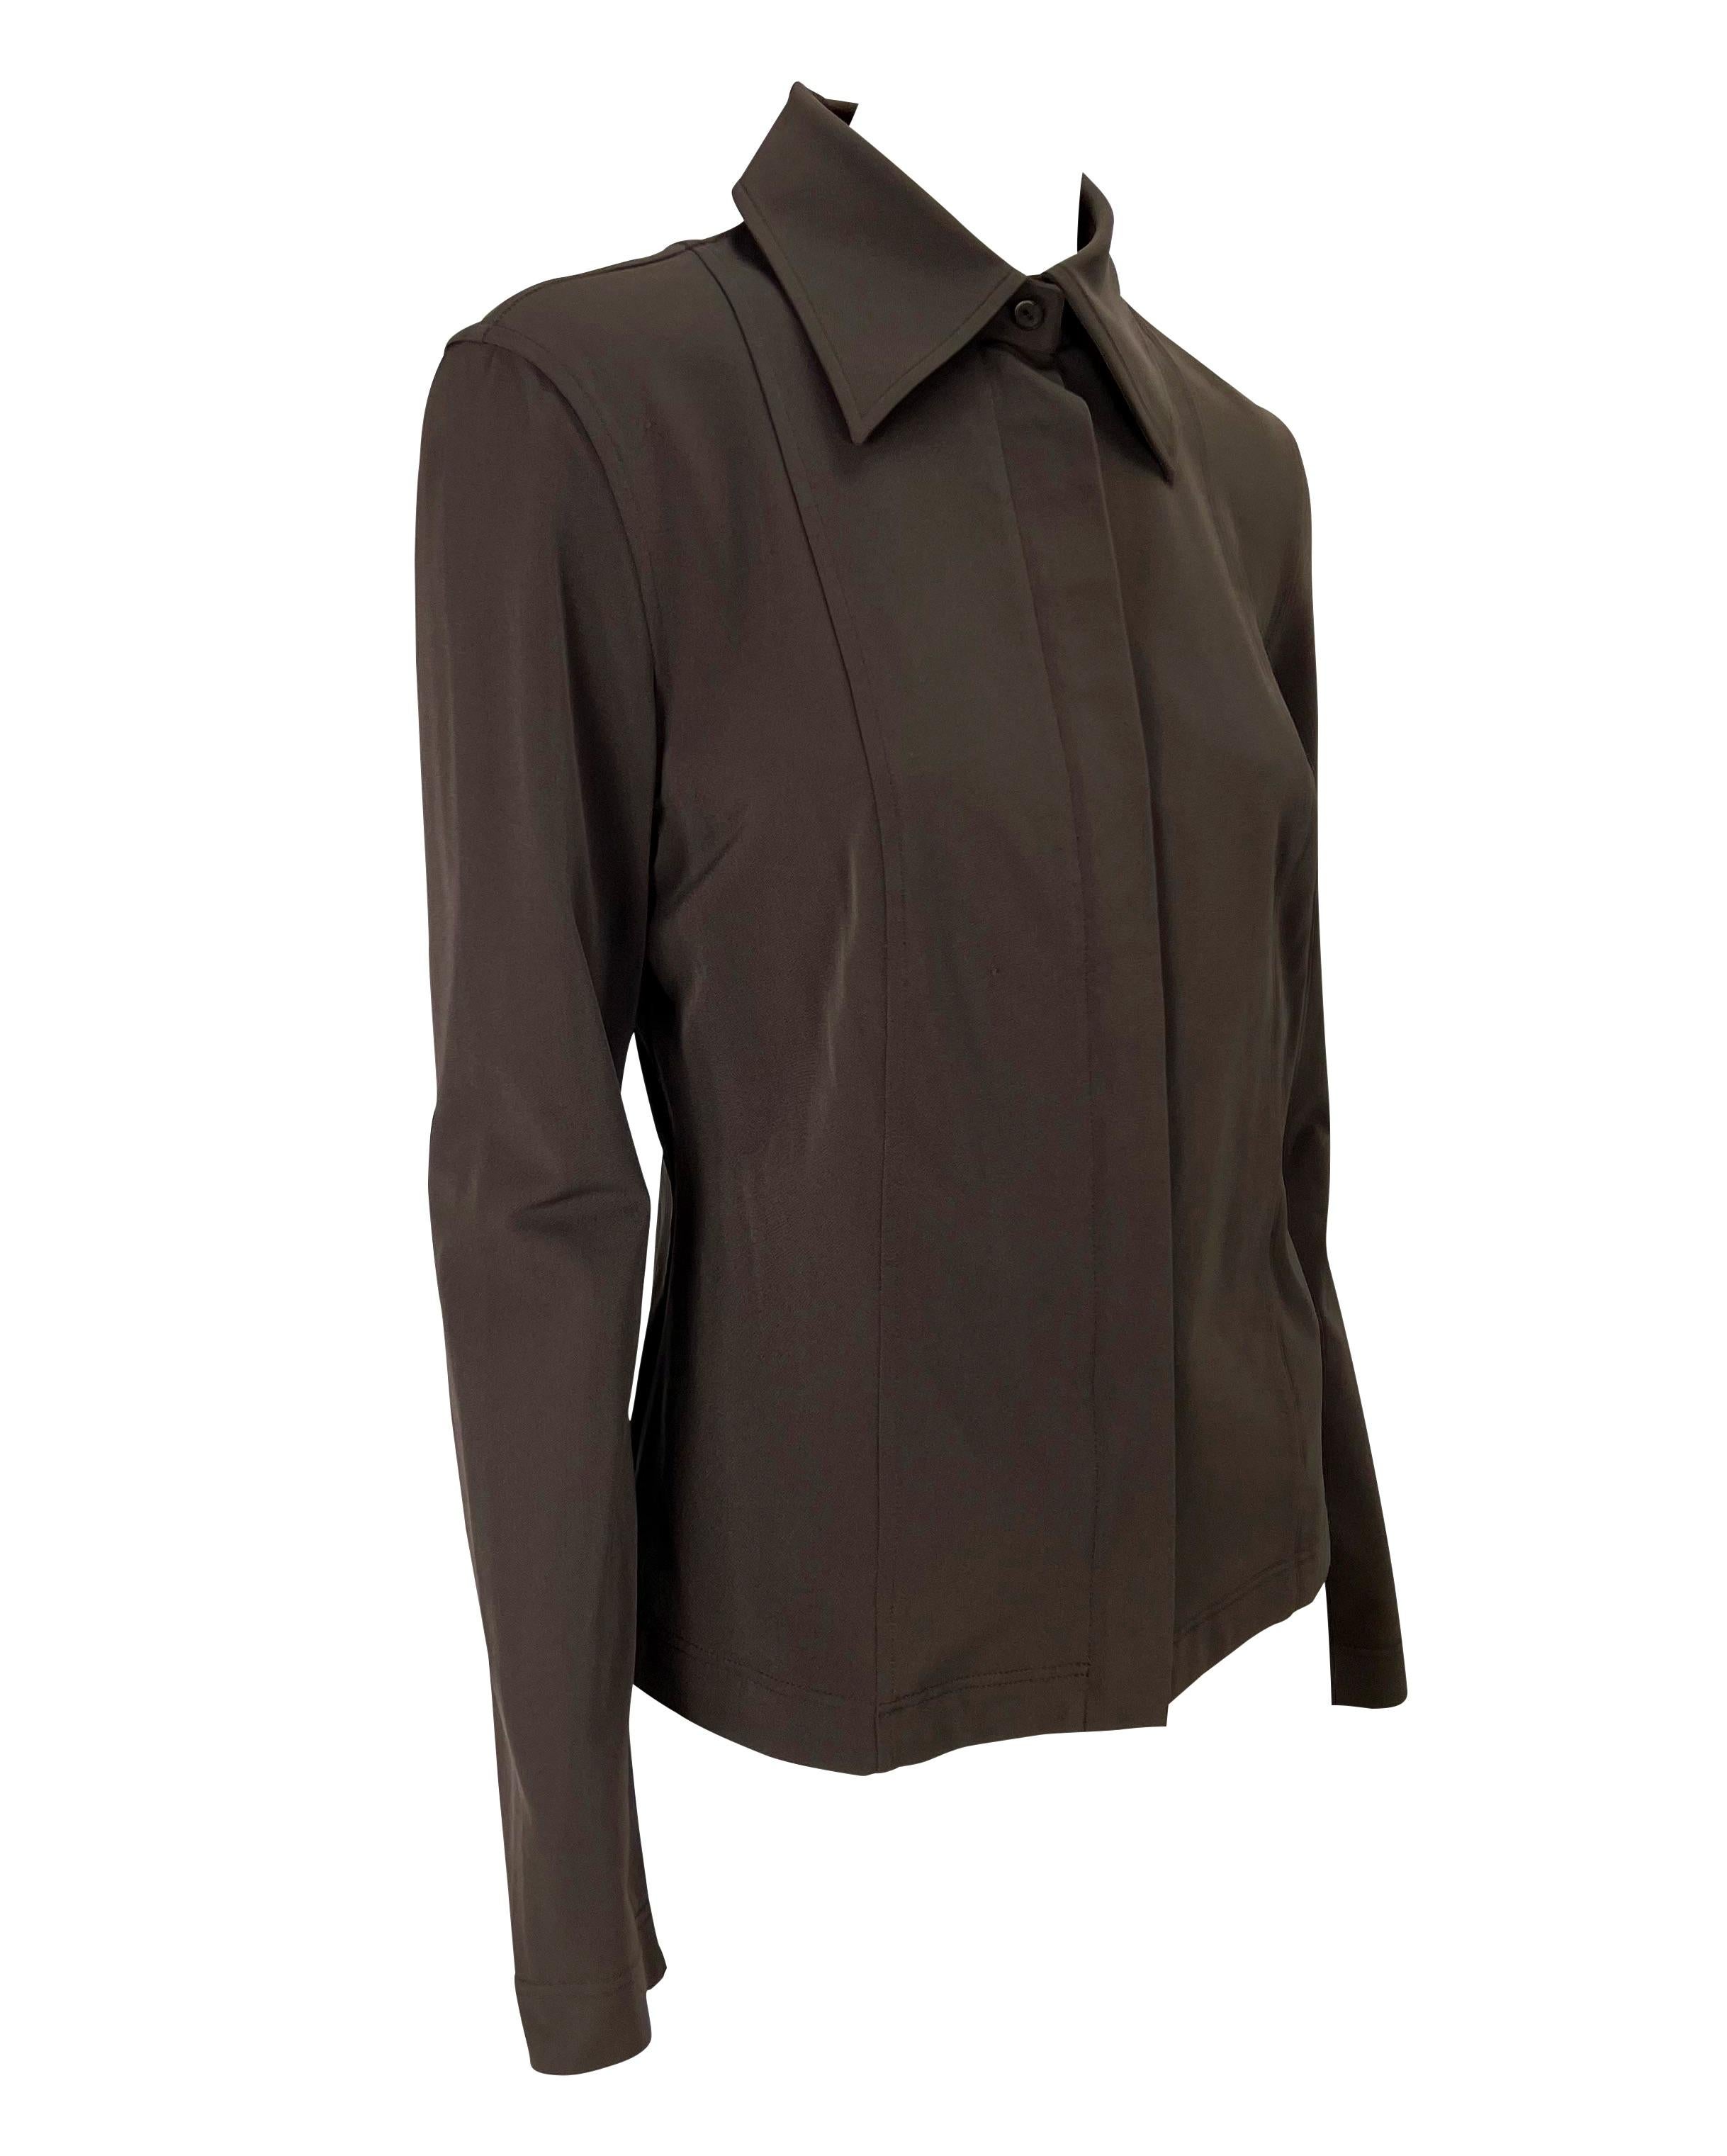 Women's S/S 1997 Gucci by Tom Ford Brown Stretch Panel Zip-Up Collared Blouse For Sale